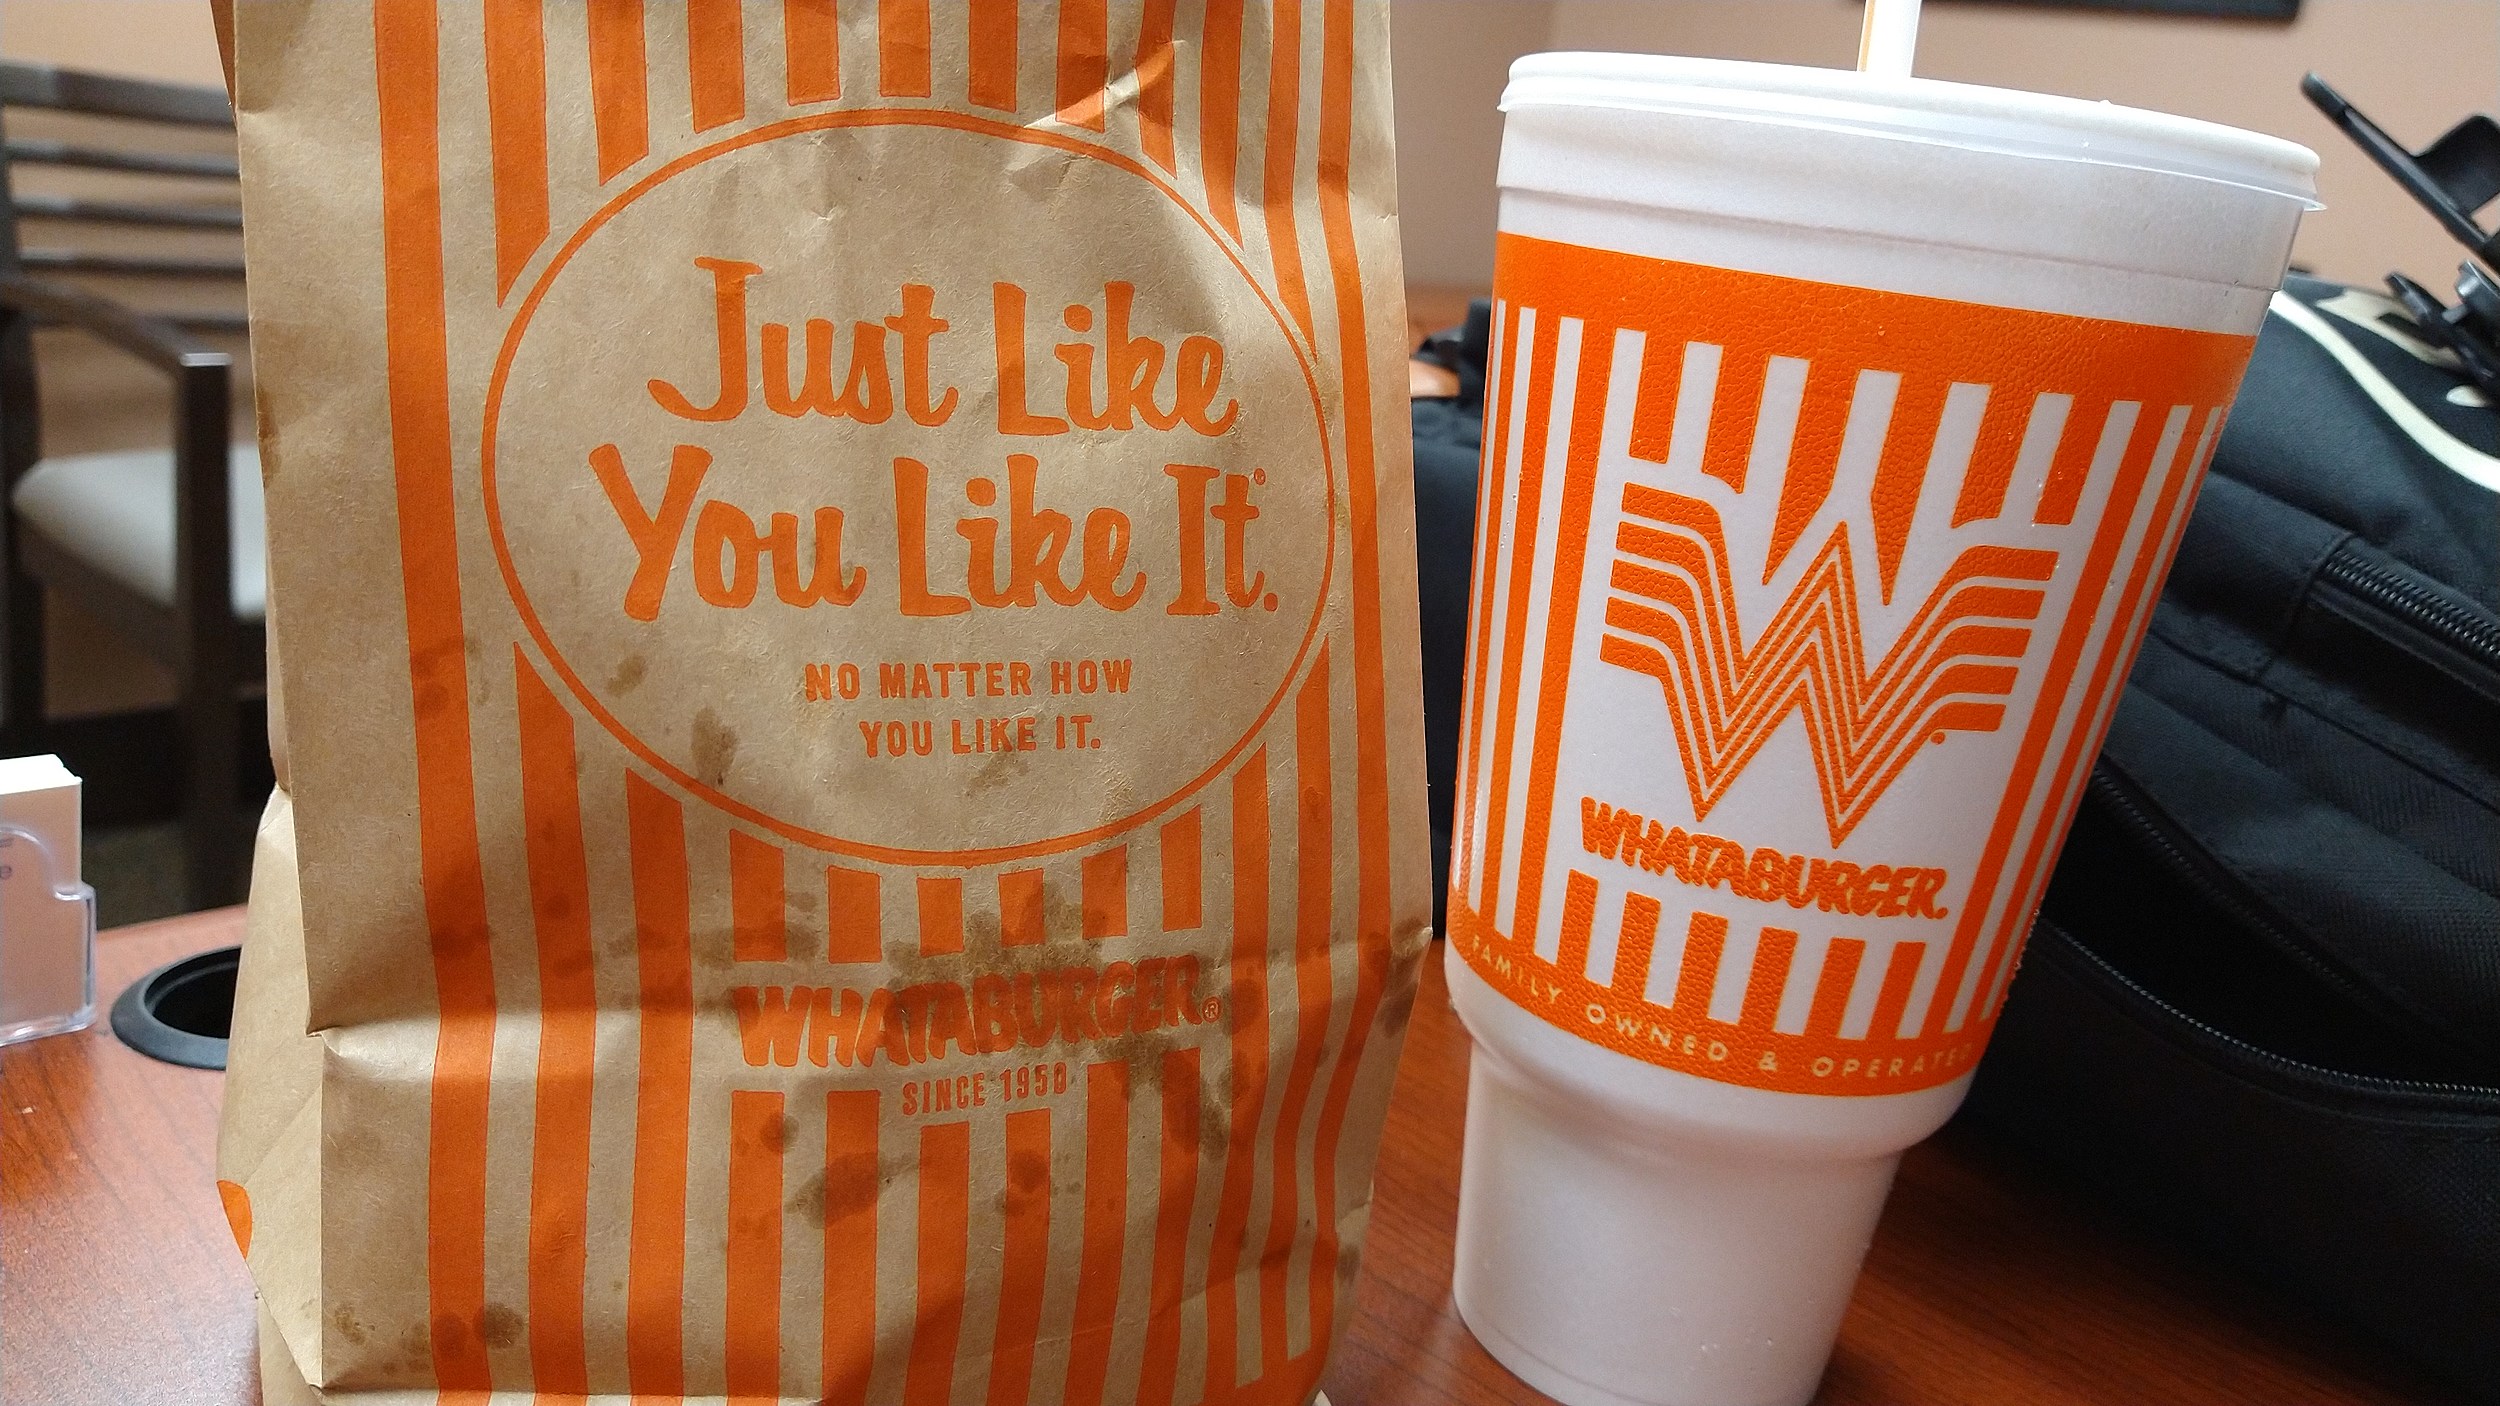 Whataburger Gifts - 60+ Gift Ideas for 2023